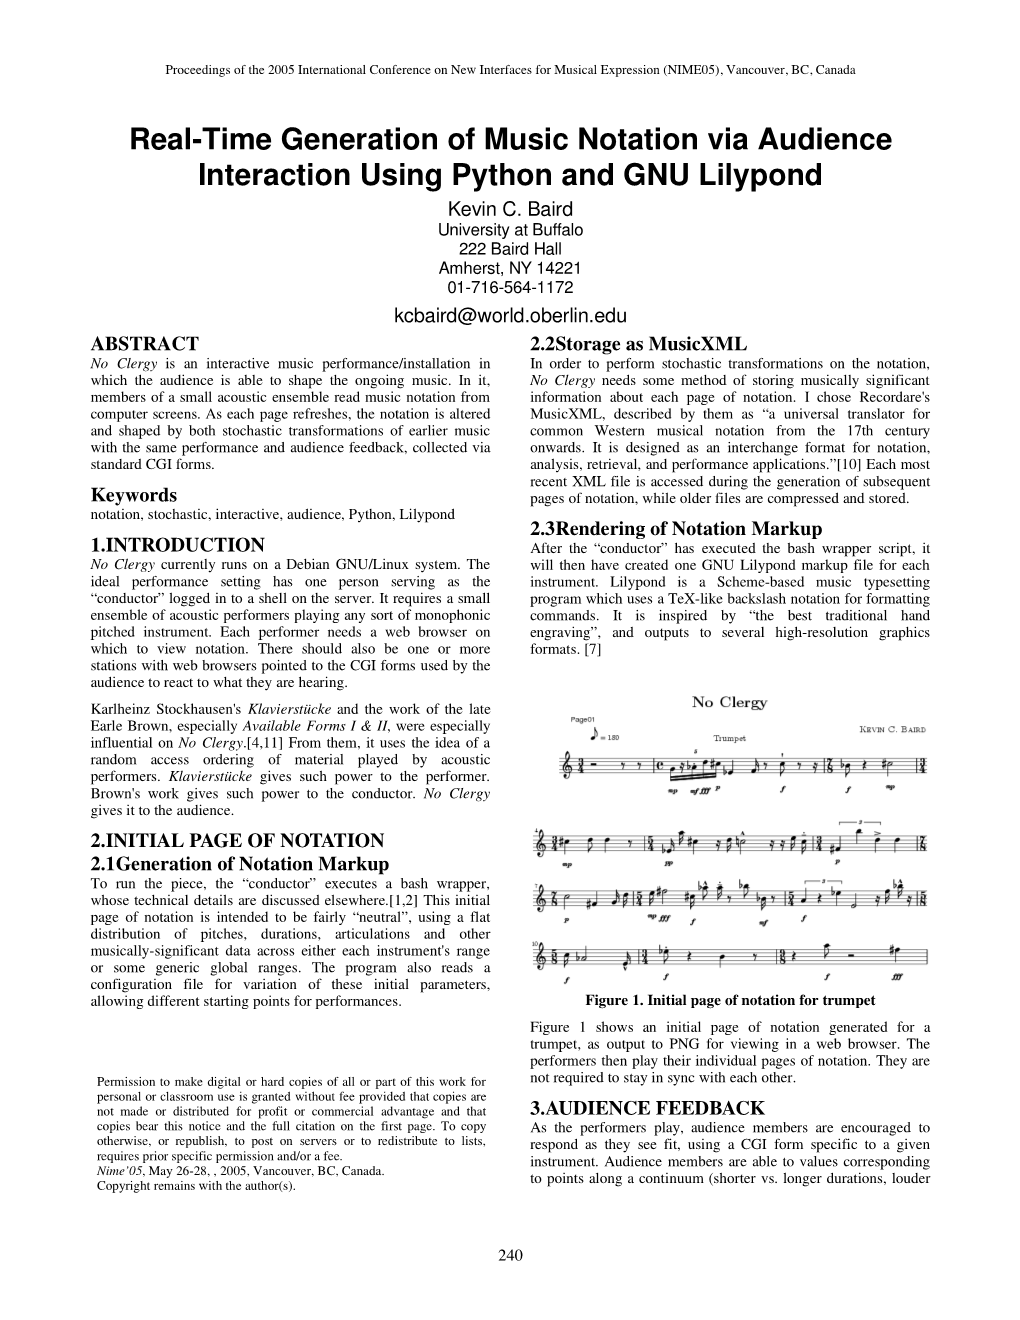 Real-Time Generation of Music Notation Via Audience Interaction Using Python and GNU Lilypond Kevin C